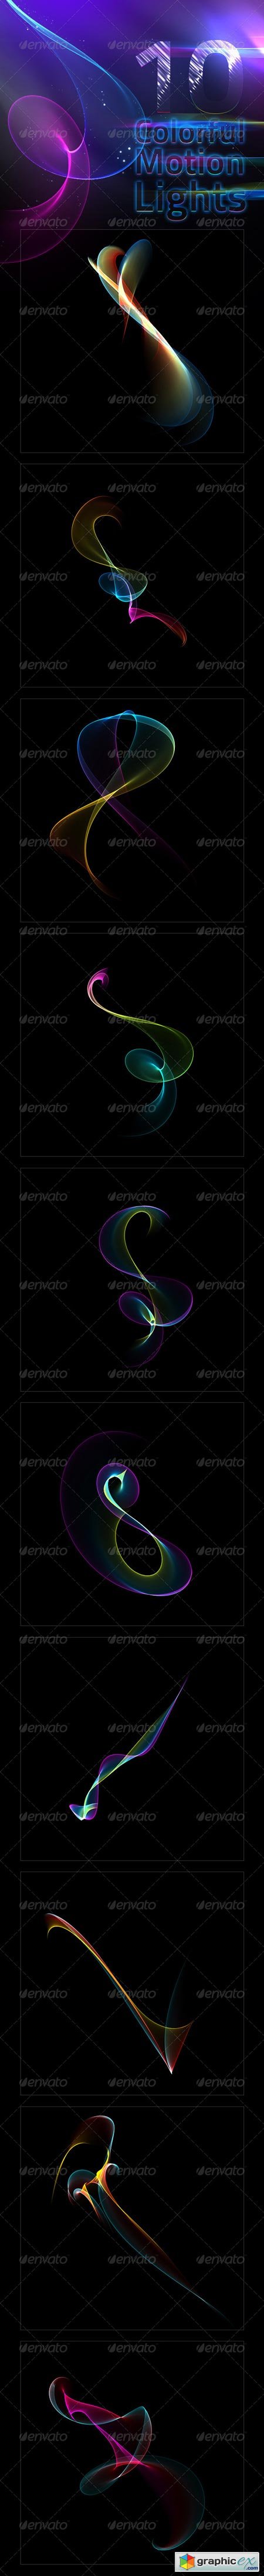 Abstract Motion Light Effects Pack 02 6050677